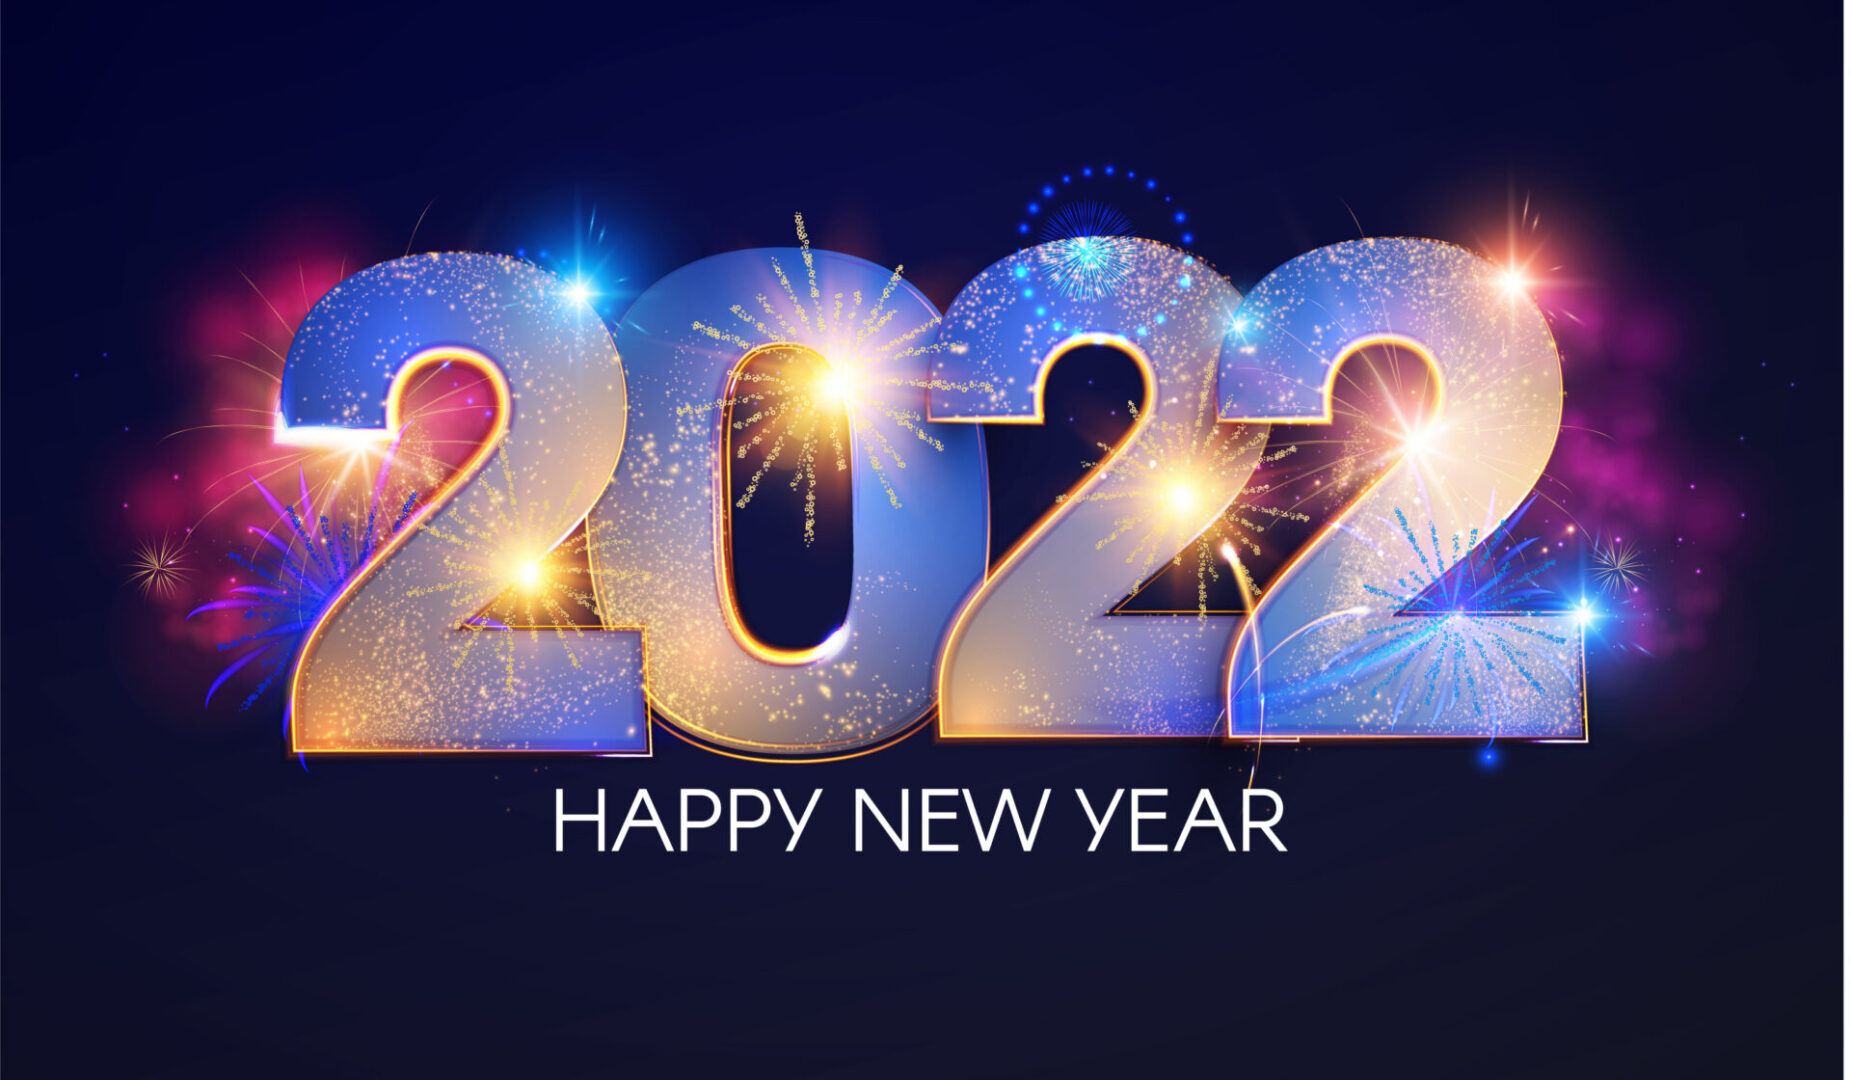 Happy new 2022 year Elegant text with light effect and fireworks.